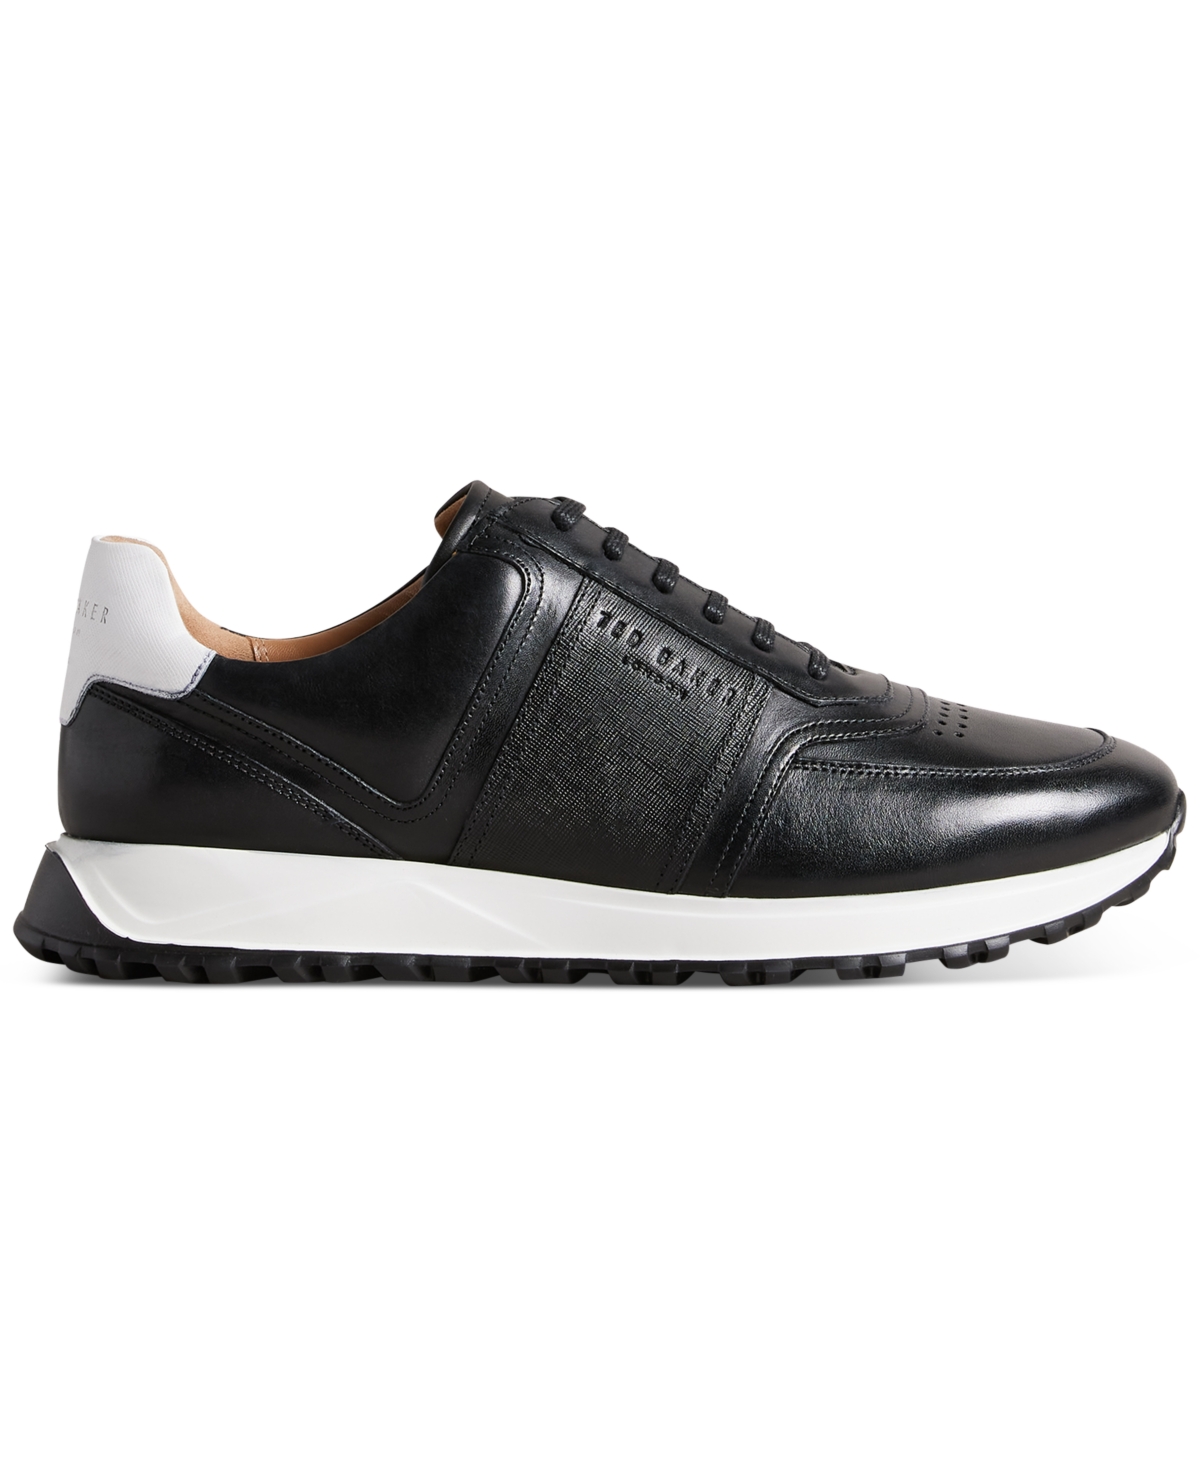 Men's Frayne Leather and Suede Retro-Style Sneaker - Black